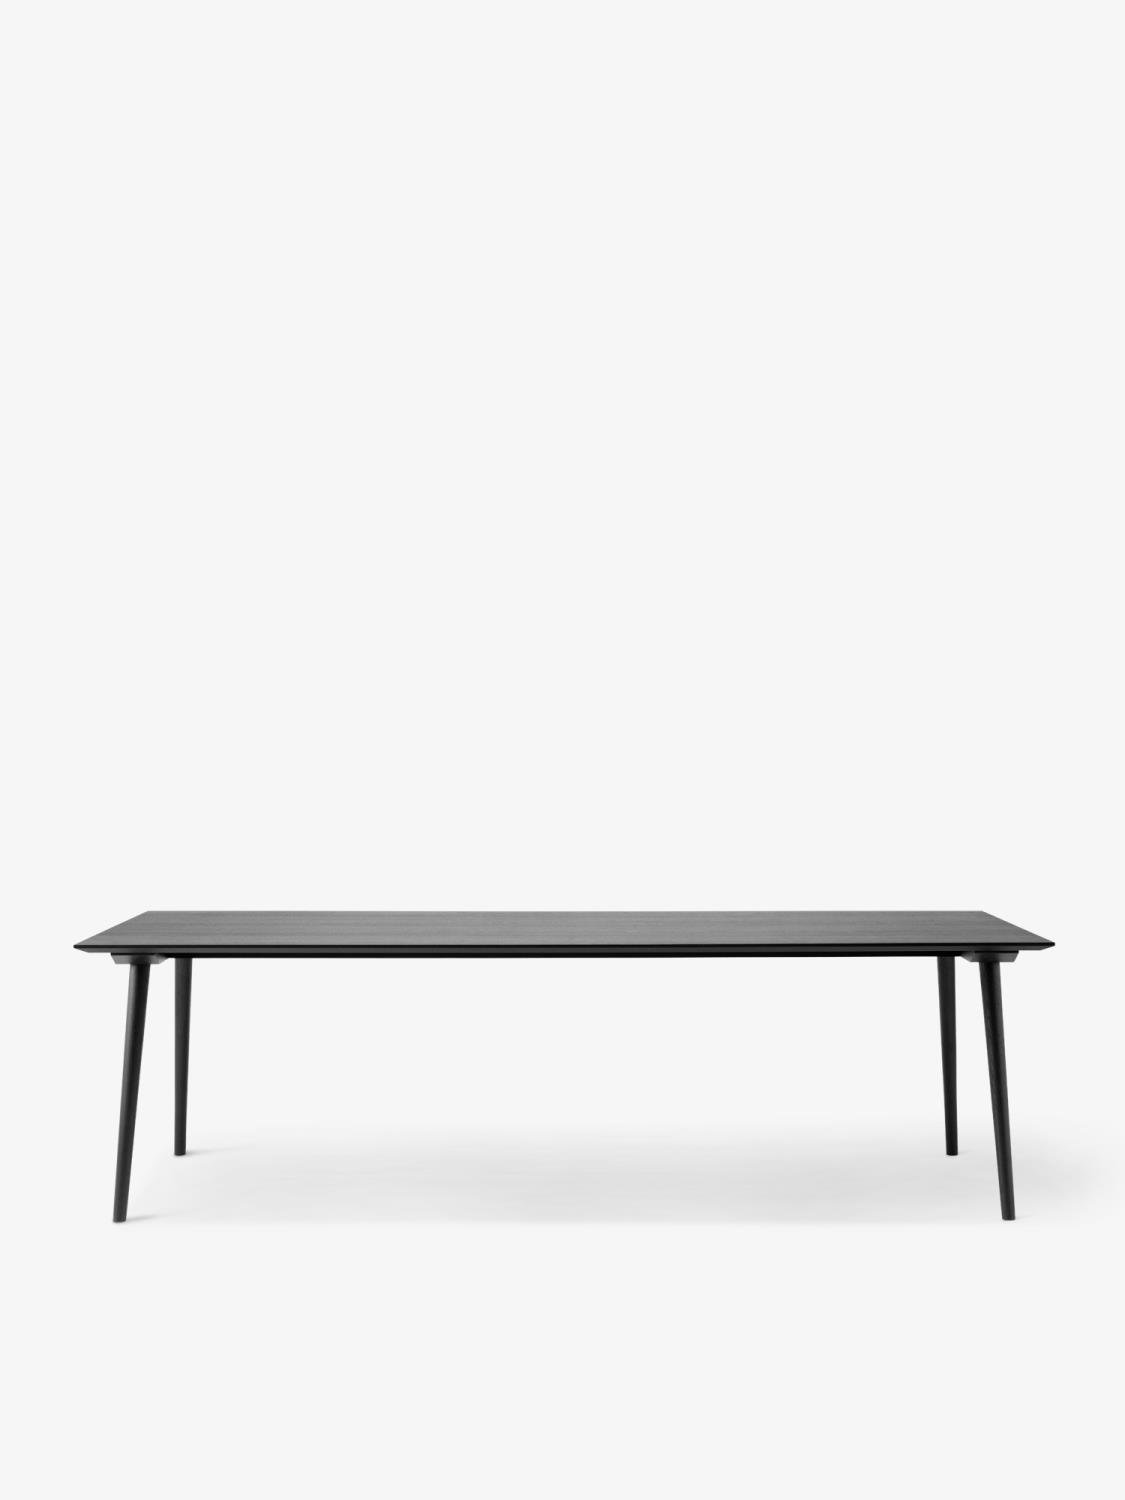 &Tradition - In Between Table SK6 - Black Lacquered Oak